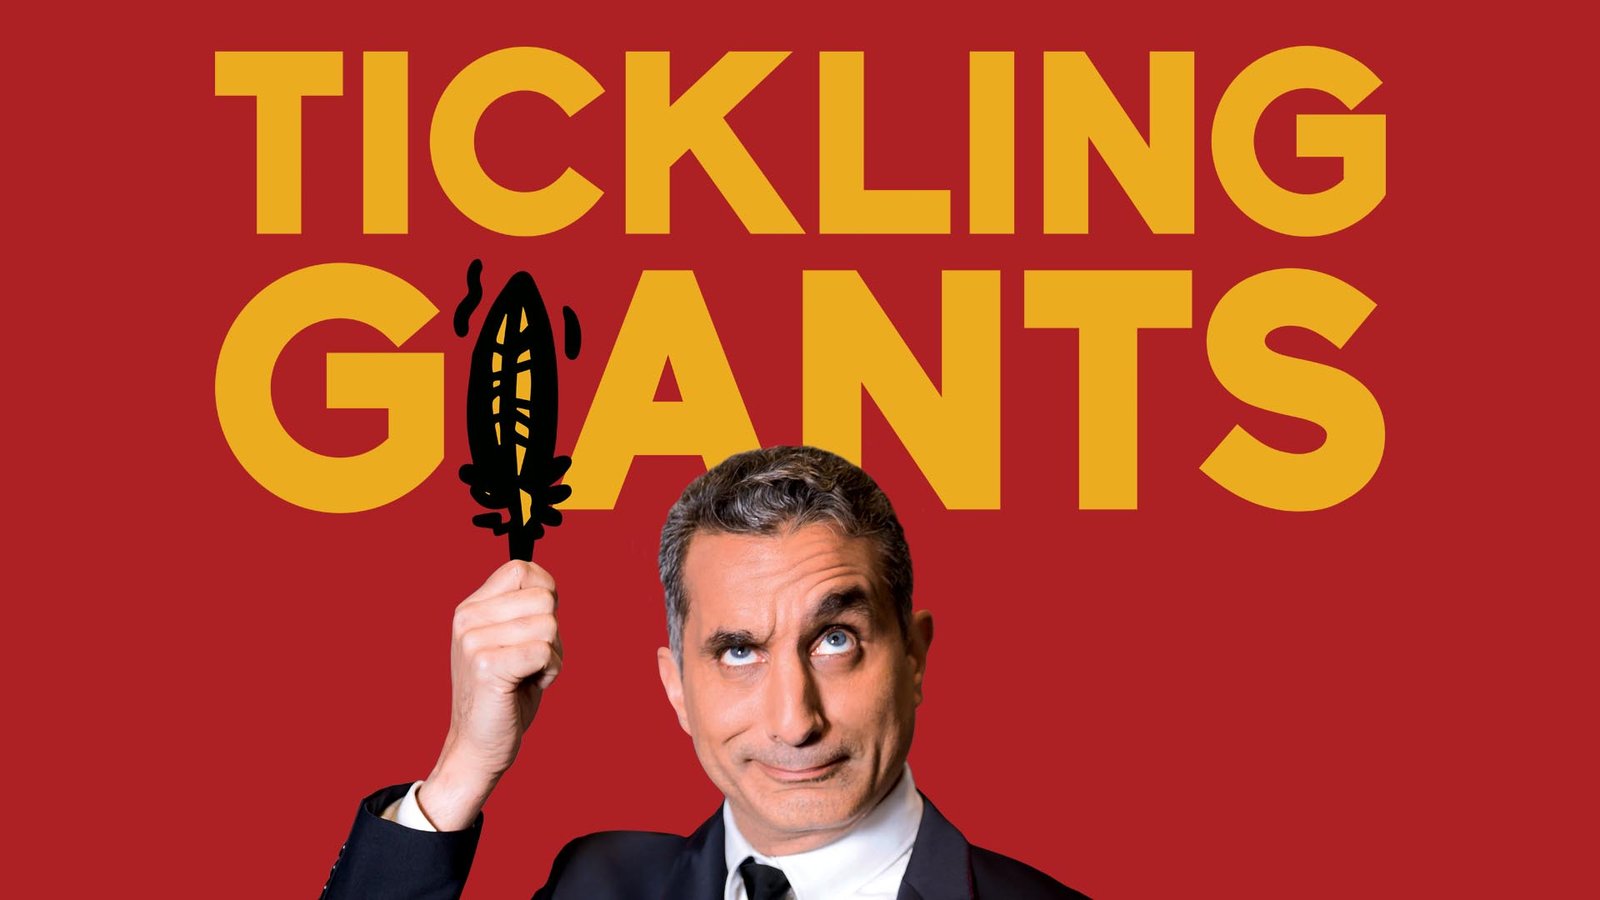 Tickling Giants - Uniting Egypt through Laughter in Tumultuous Times